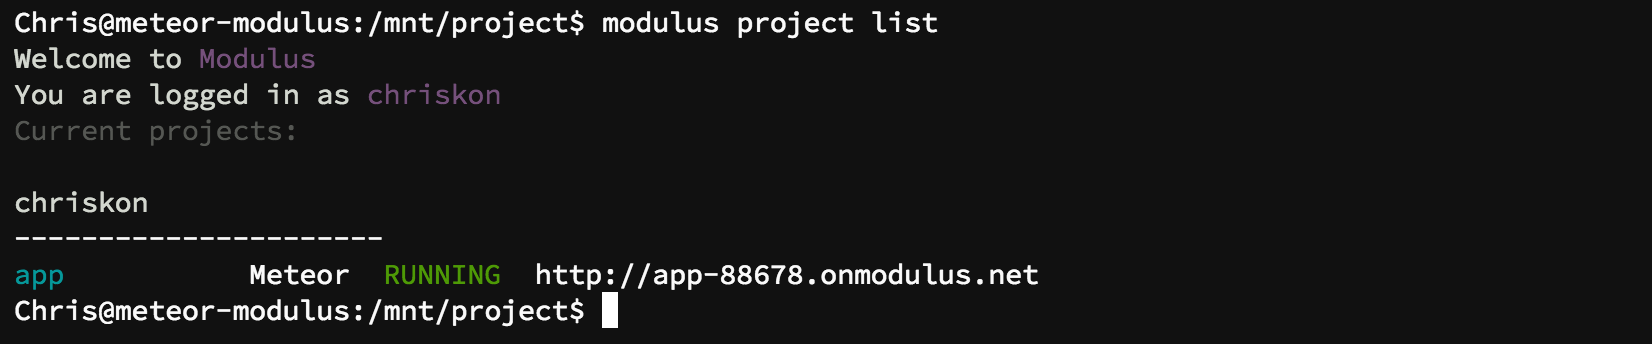 output of modulus project list command